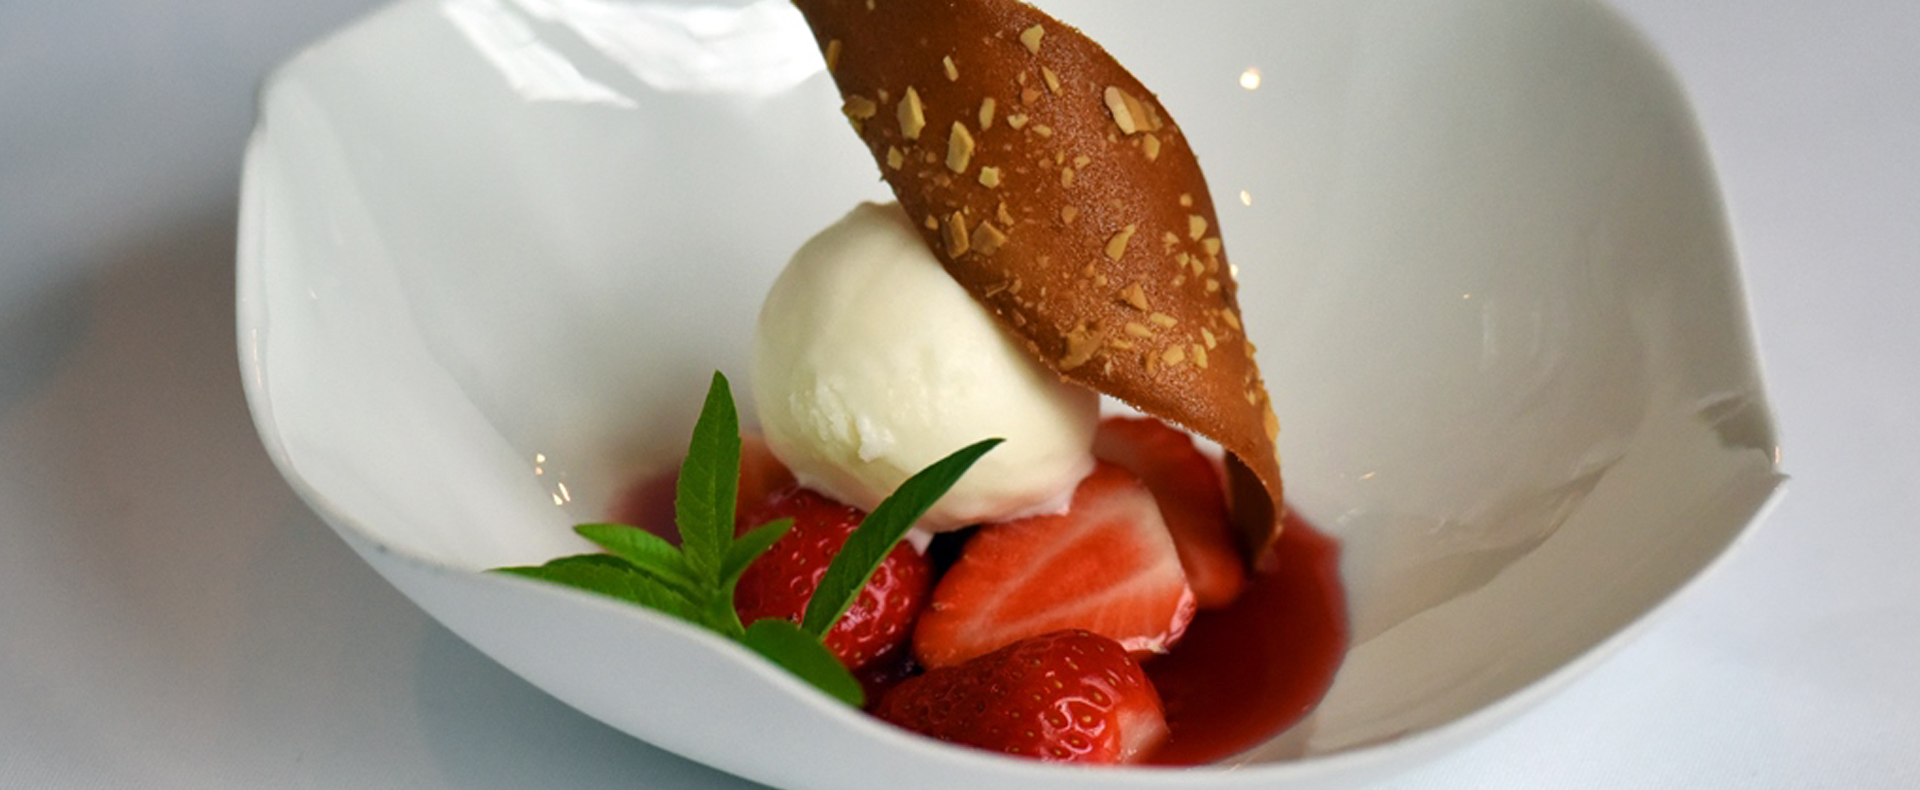 New Forest Strawberry Consomm Recipe 1920x790